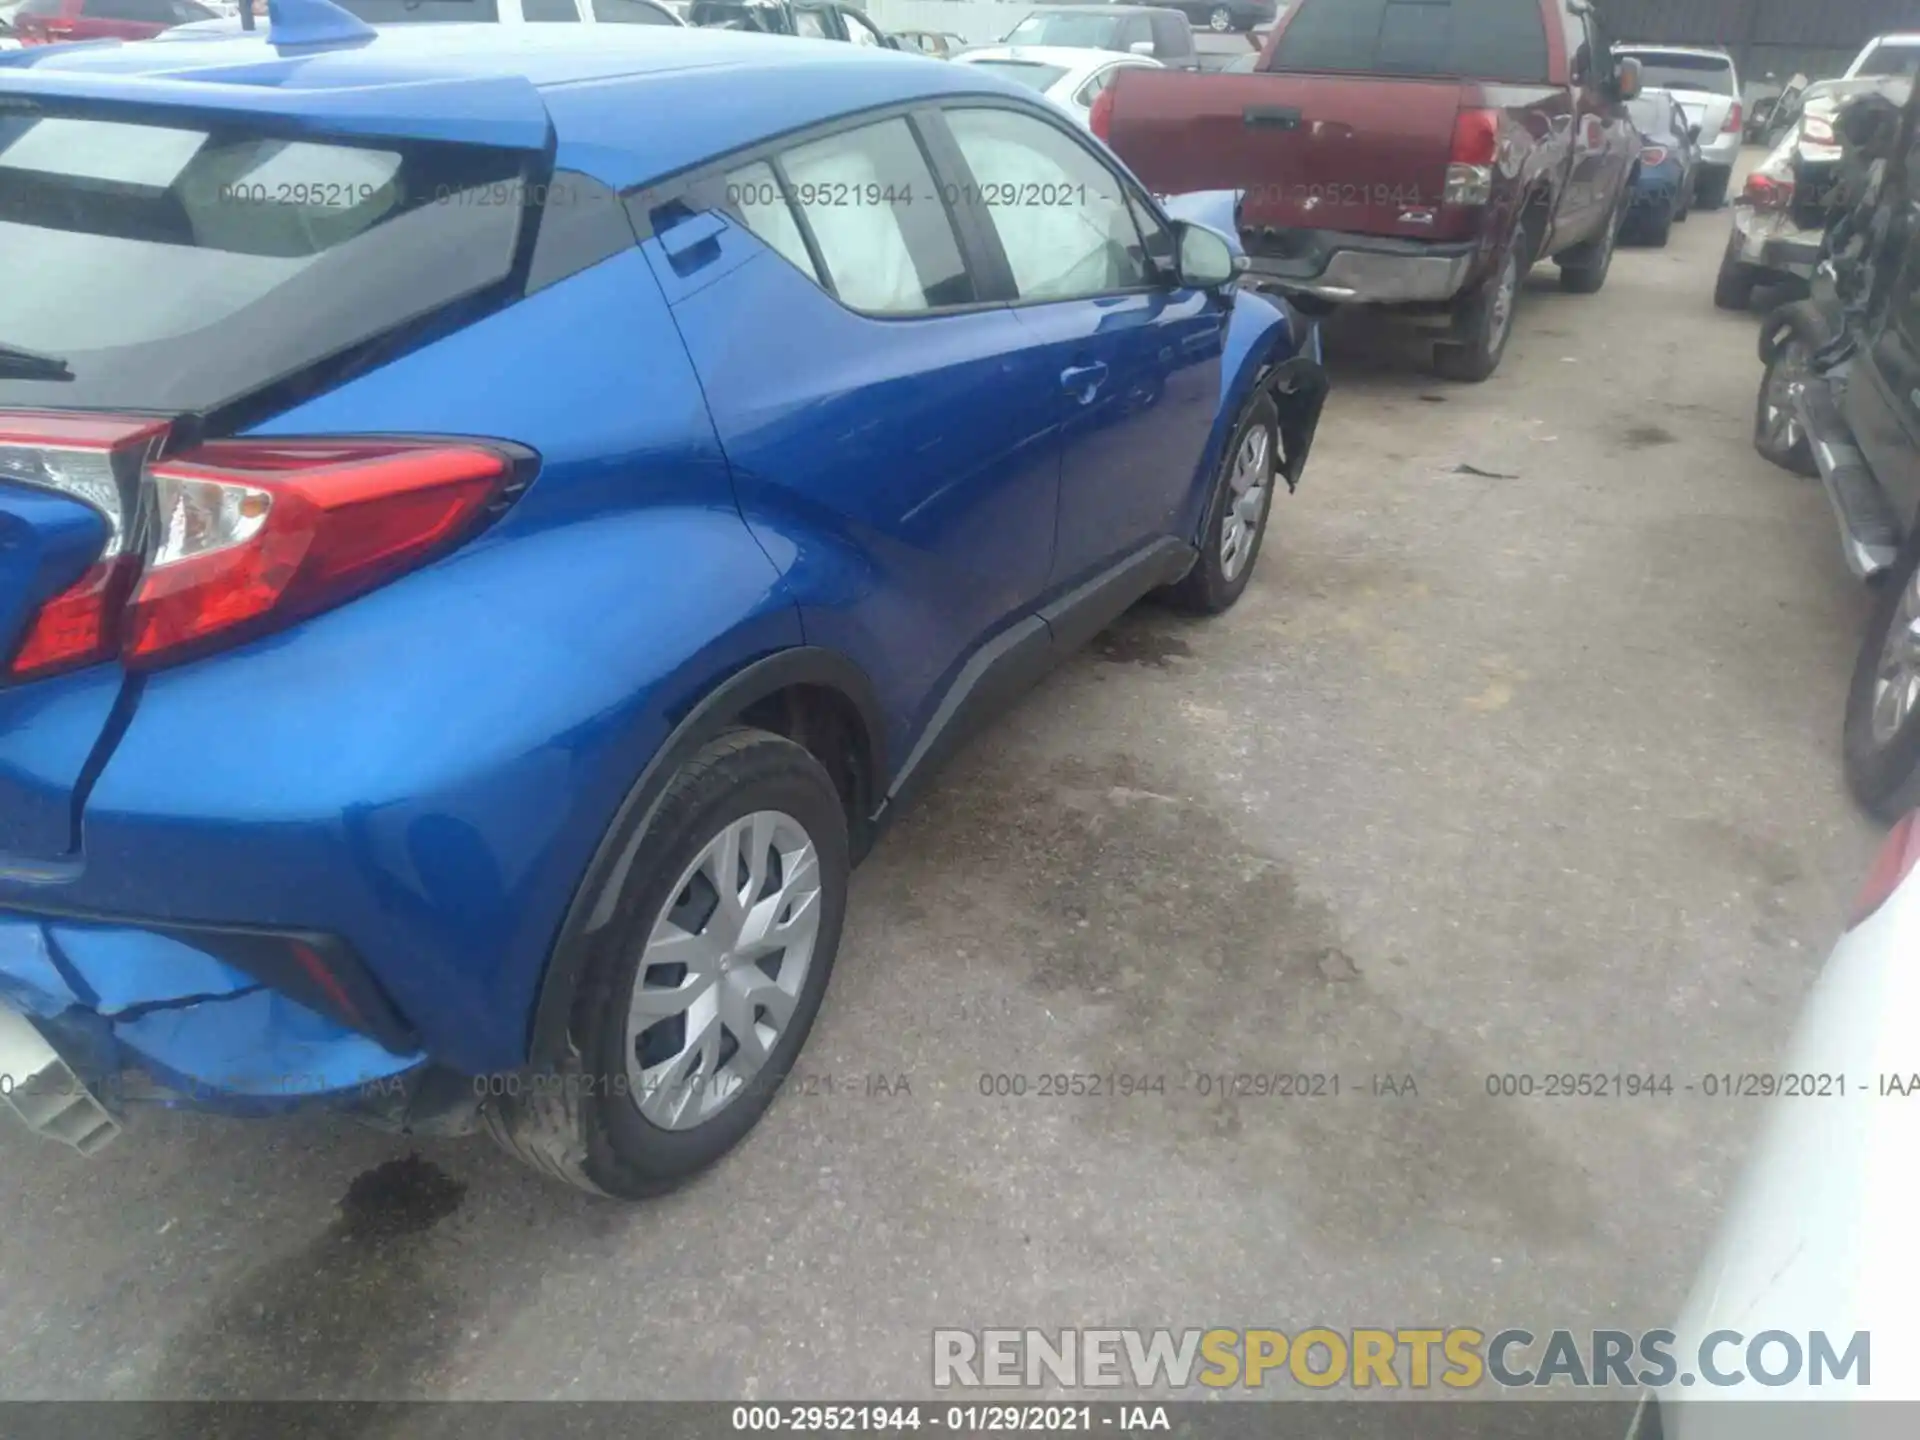 4 Photograph of a damaged car NMTKHMBXXKR081834 TOYOTA C-HR 2019